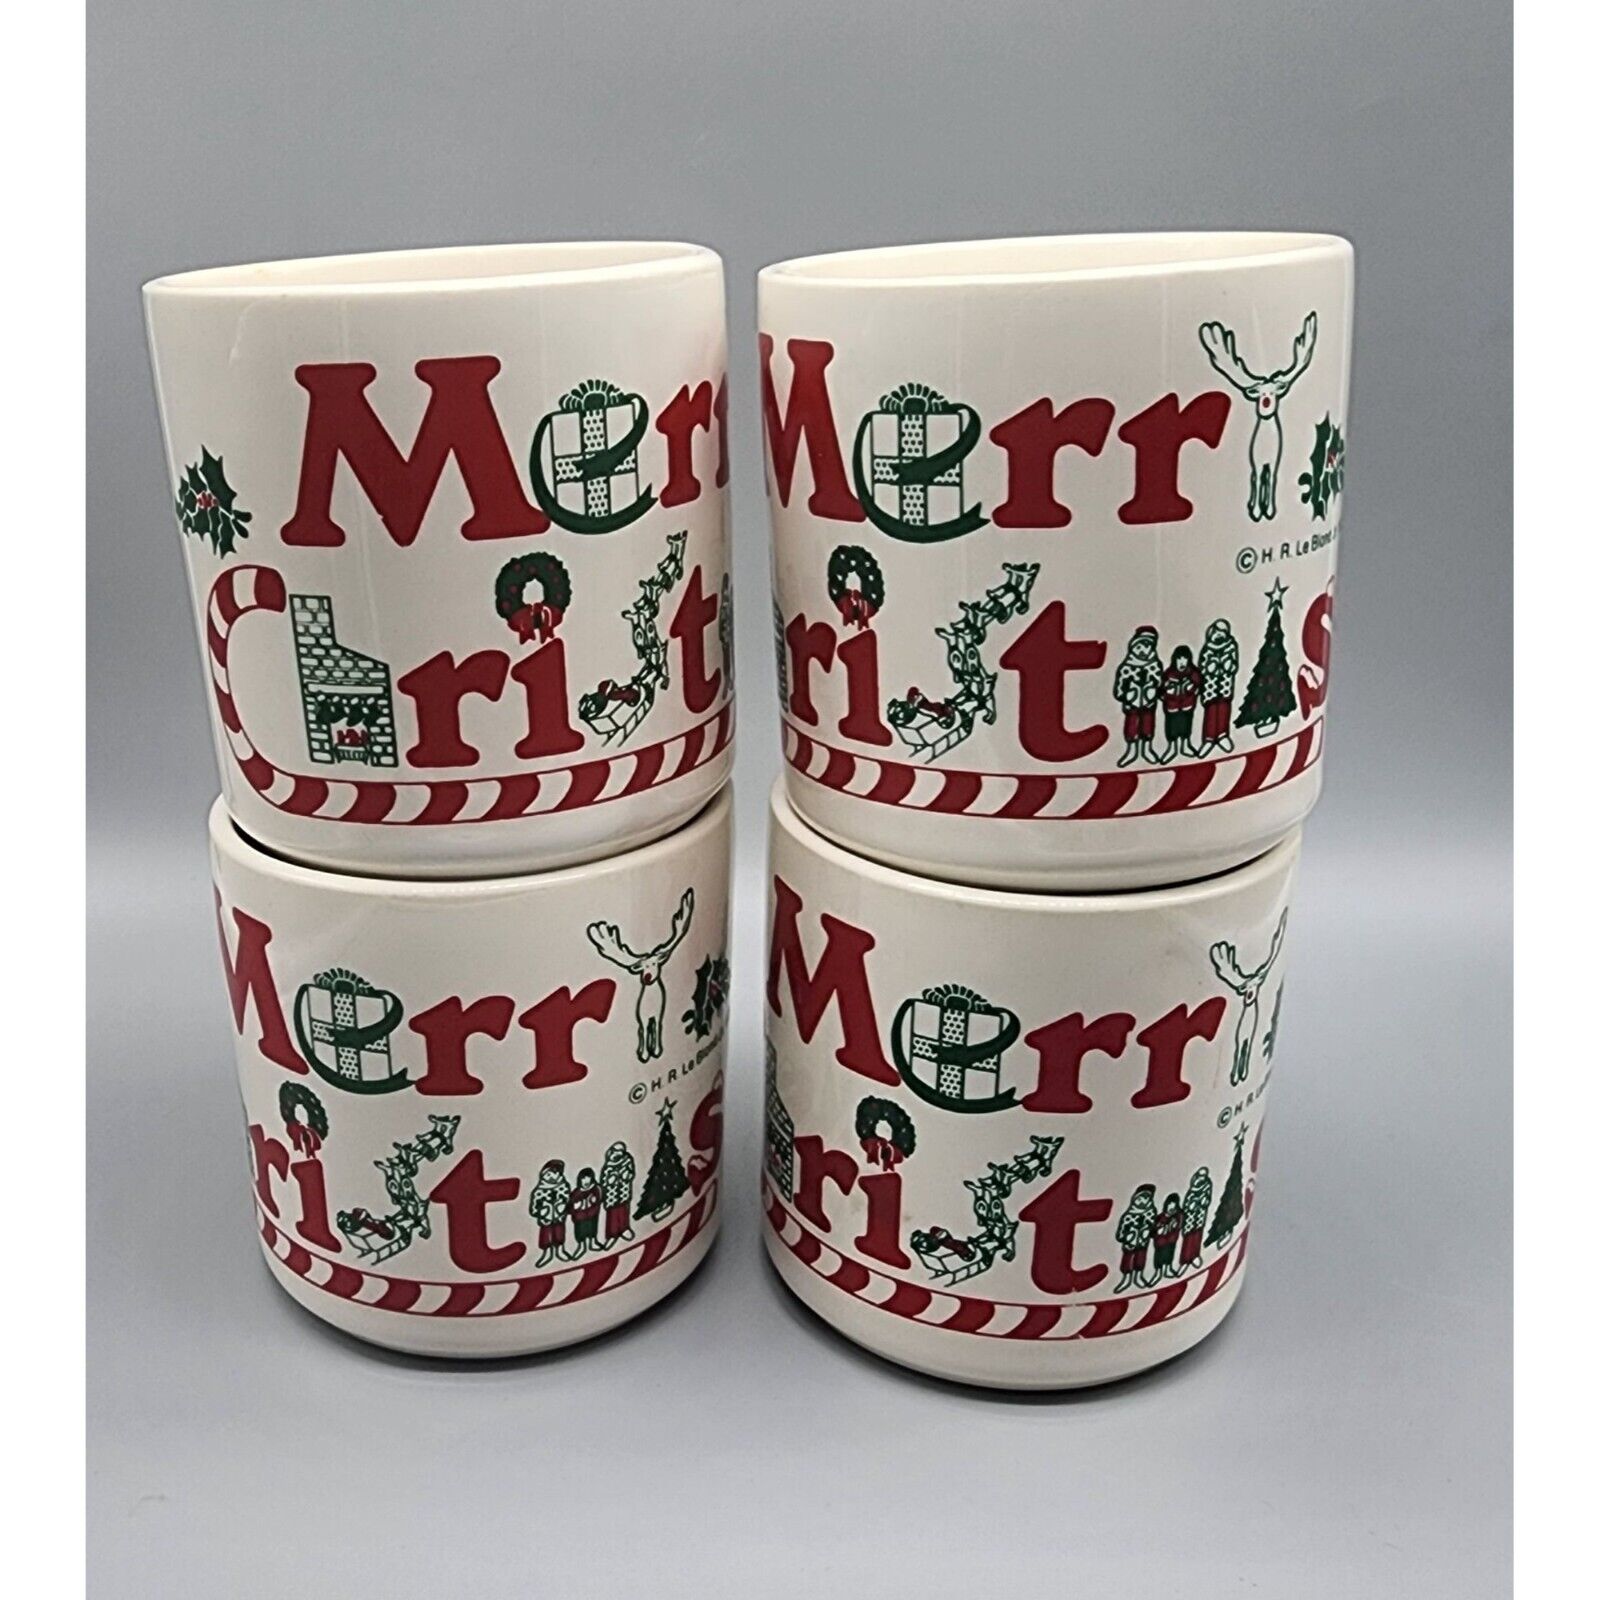 1979 H.R. Le Blond Jr USA Merry Christmas Red & Green Ceramic Mugs Set of 4